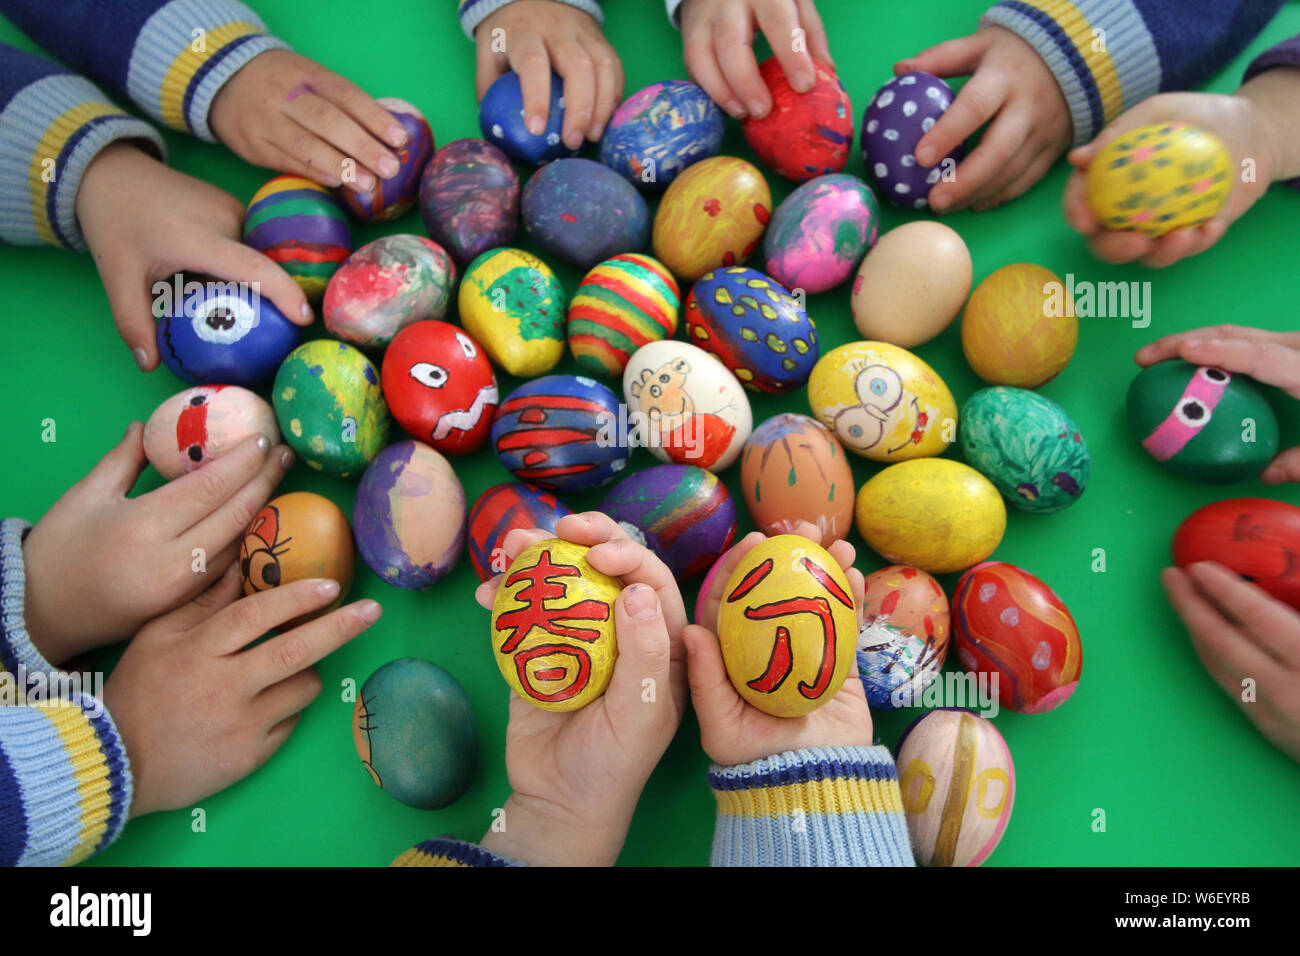 Children show eggs painted with Chinese characters and colors to mark the day of 'Chunfen' (Spring Equinox or Vernal Equinox) at a kindergarten in Han Stock Photo